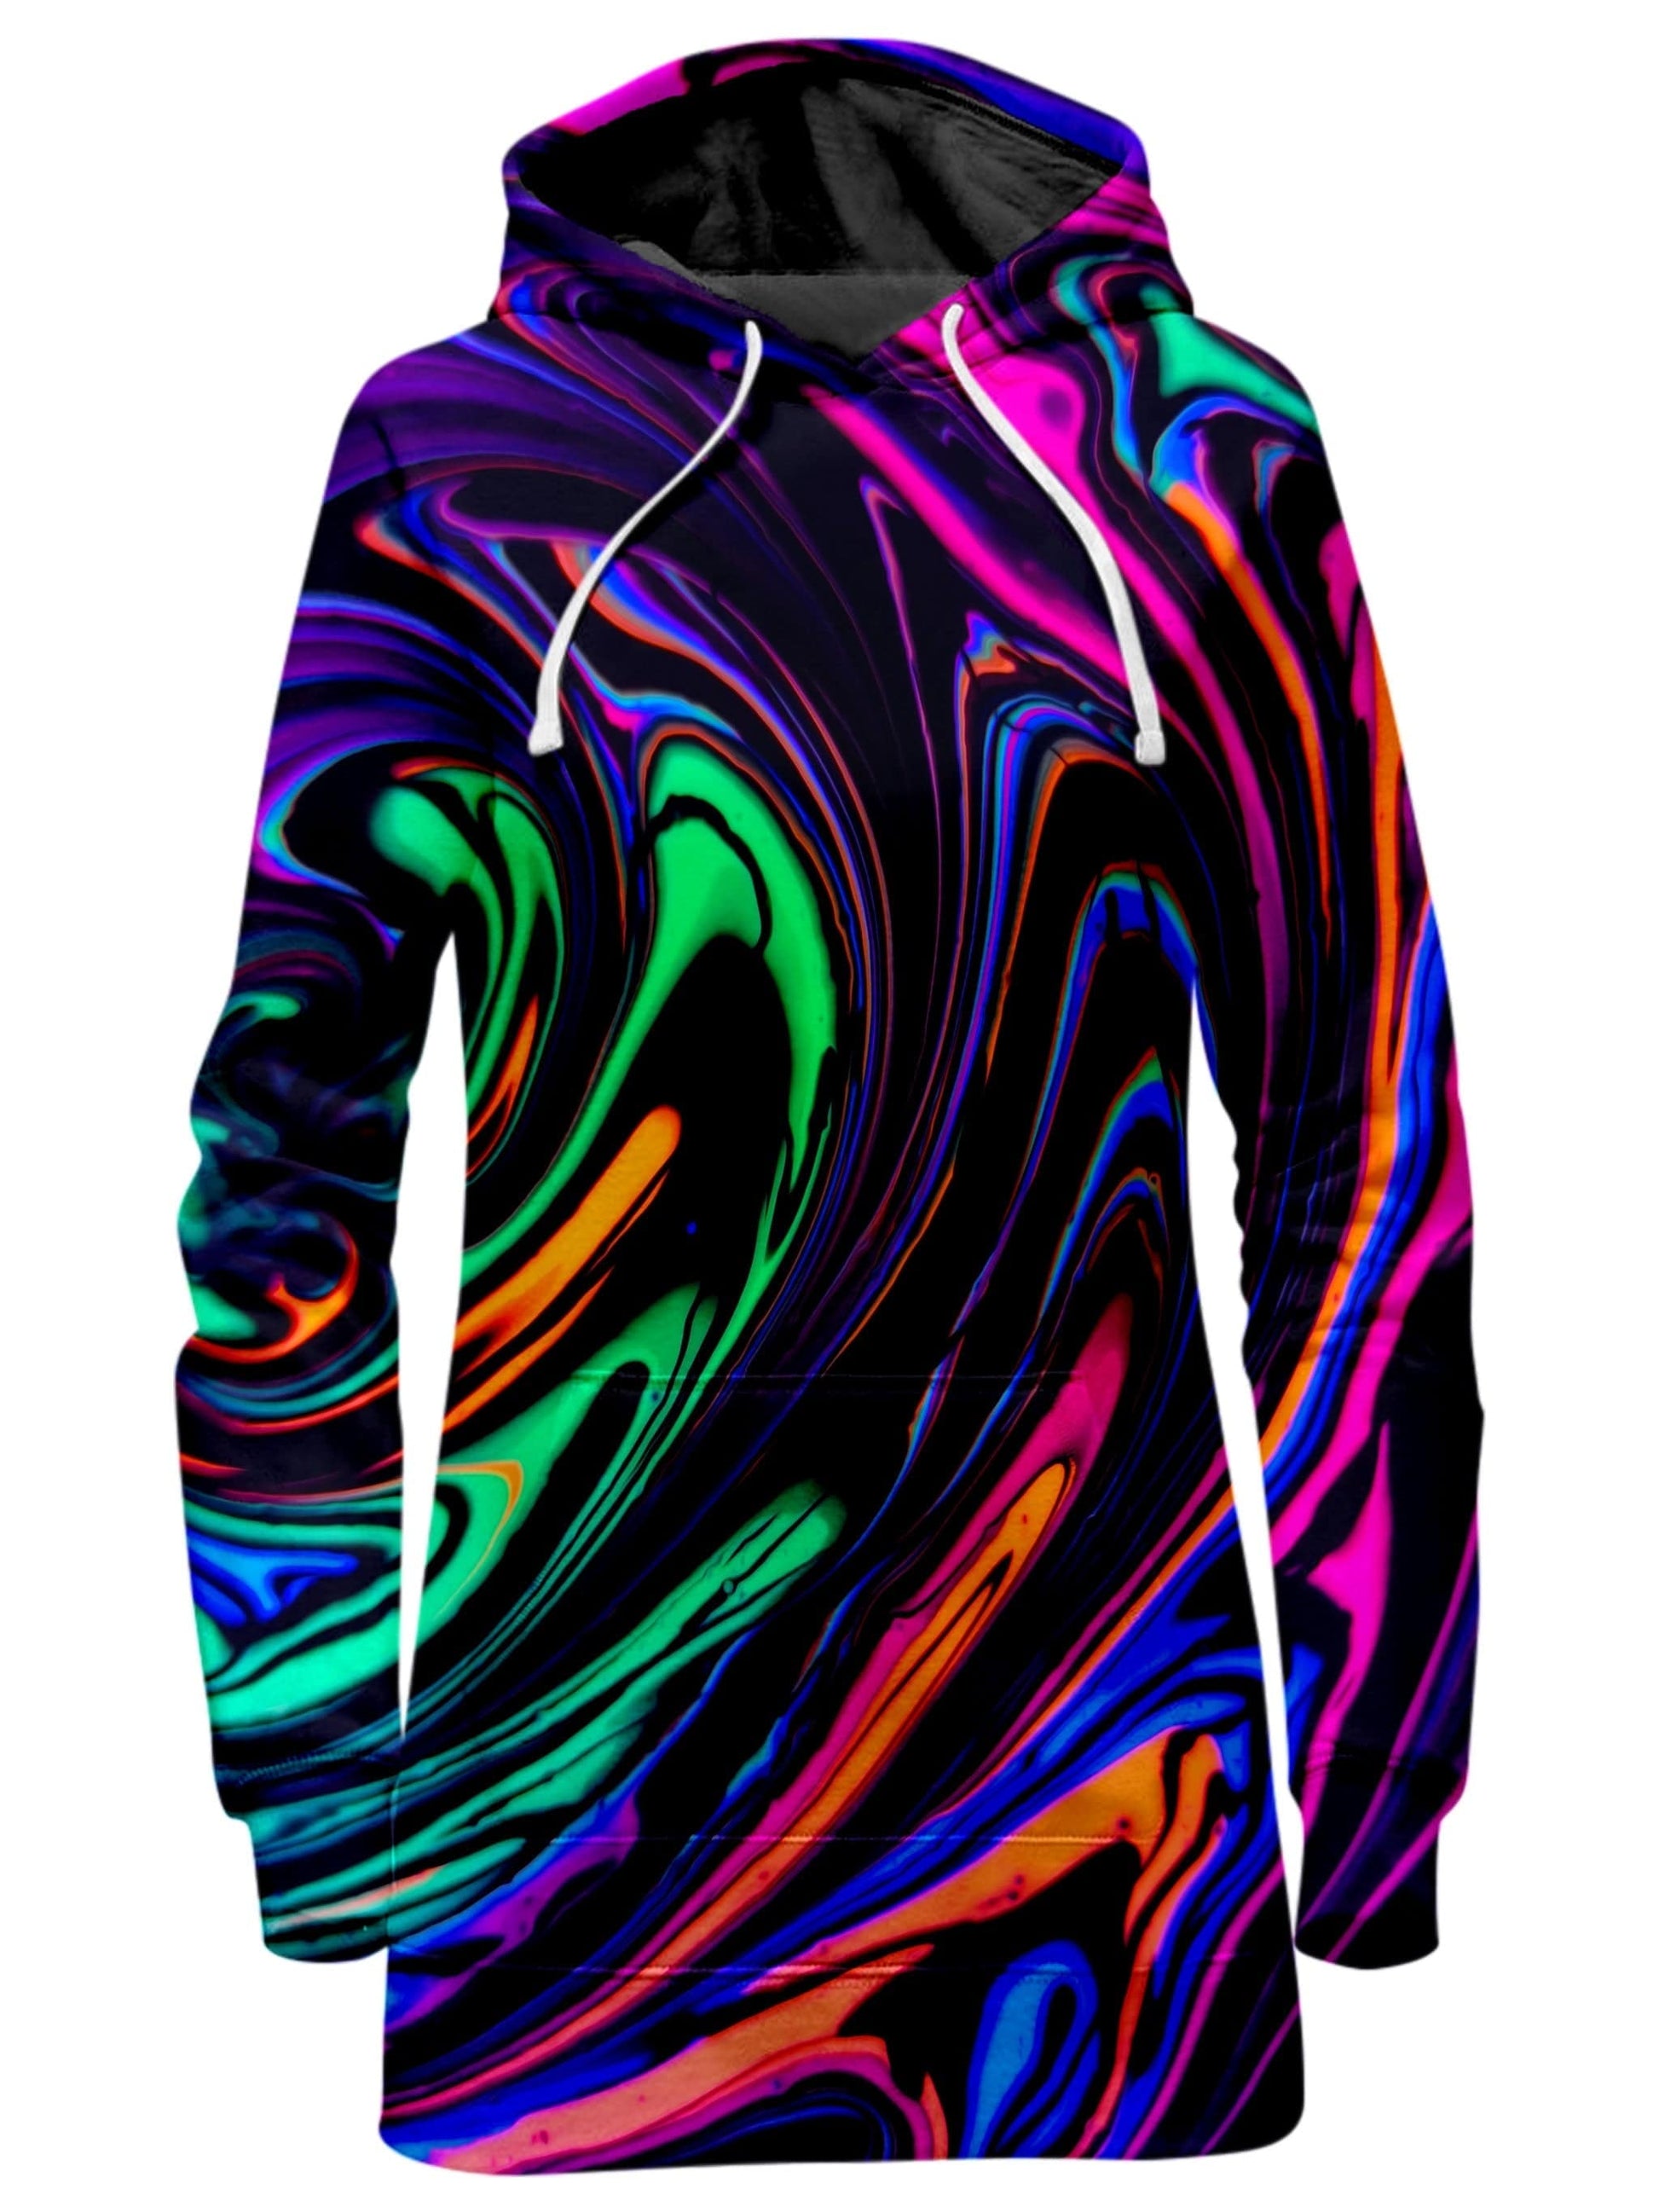 Cosmic Dream Hoodie Dress, Psychedelic Pourhouse, | iEDM